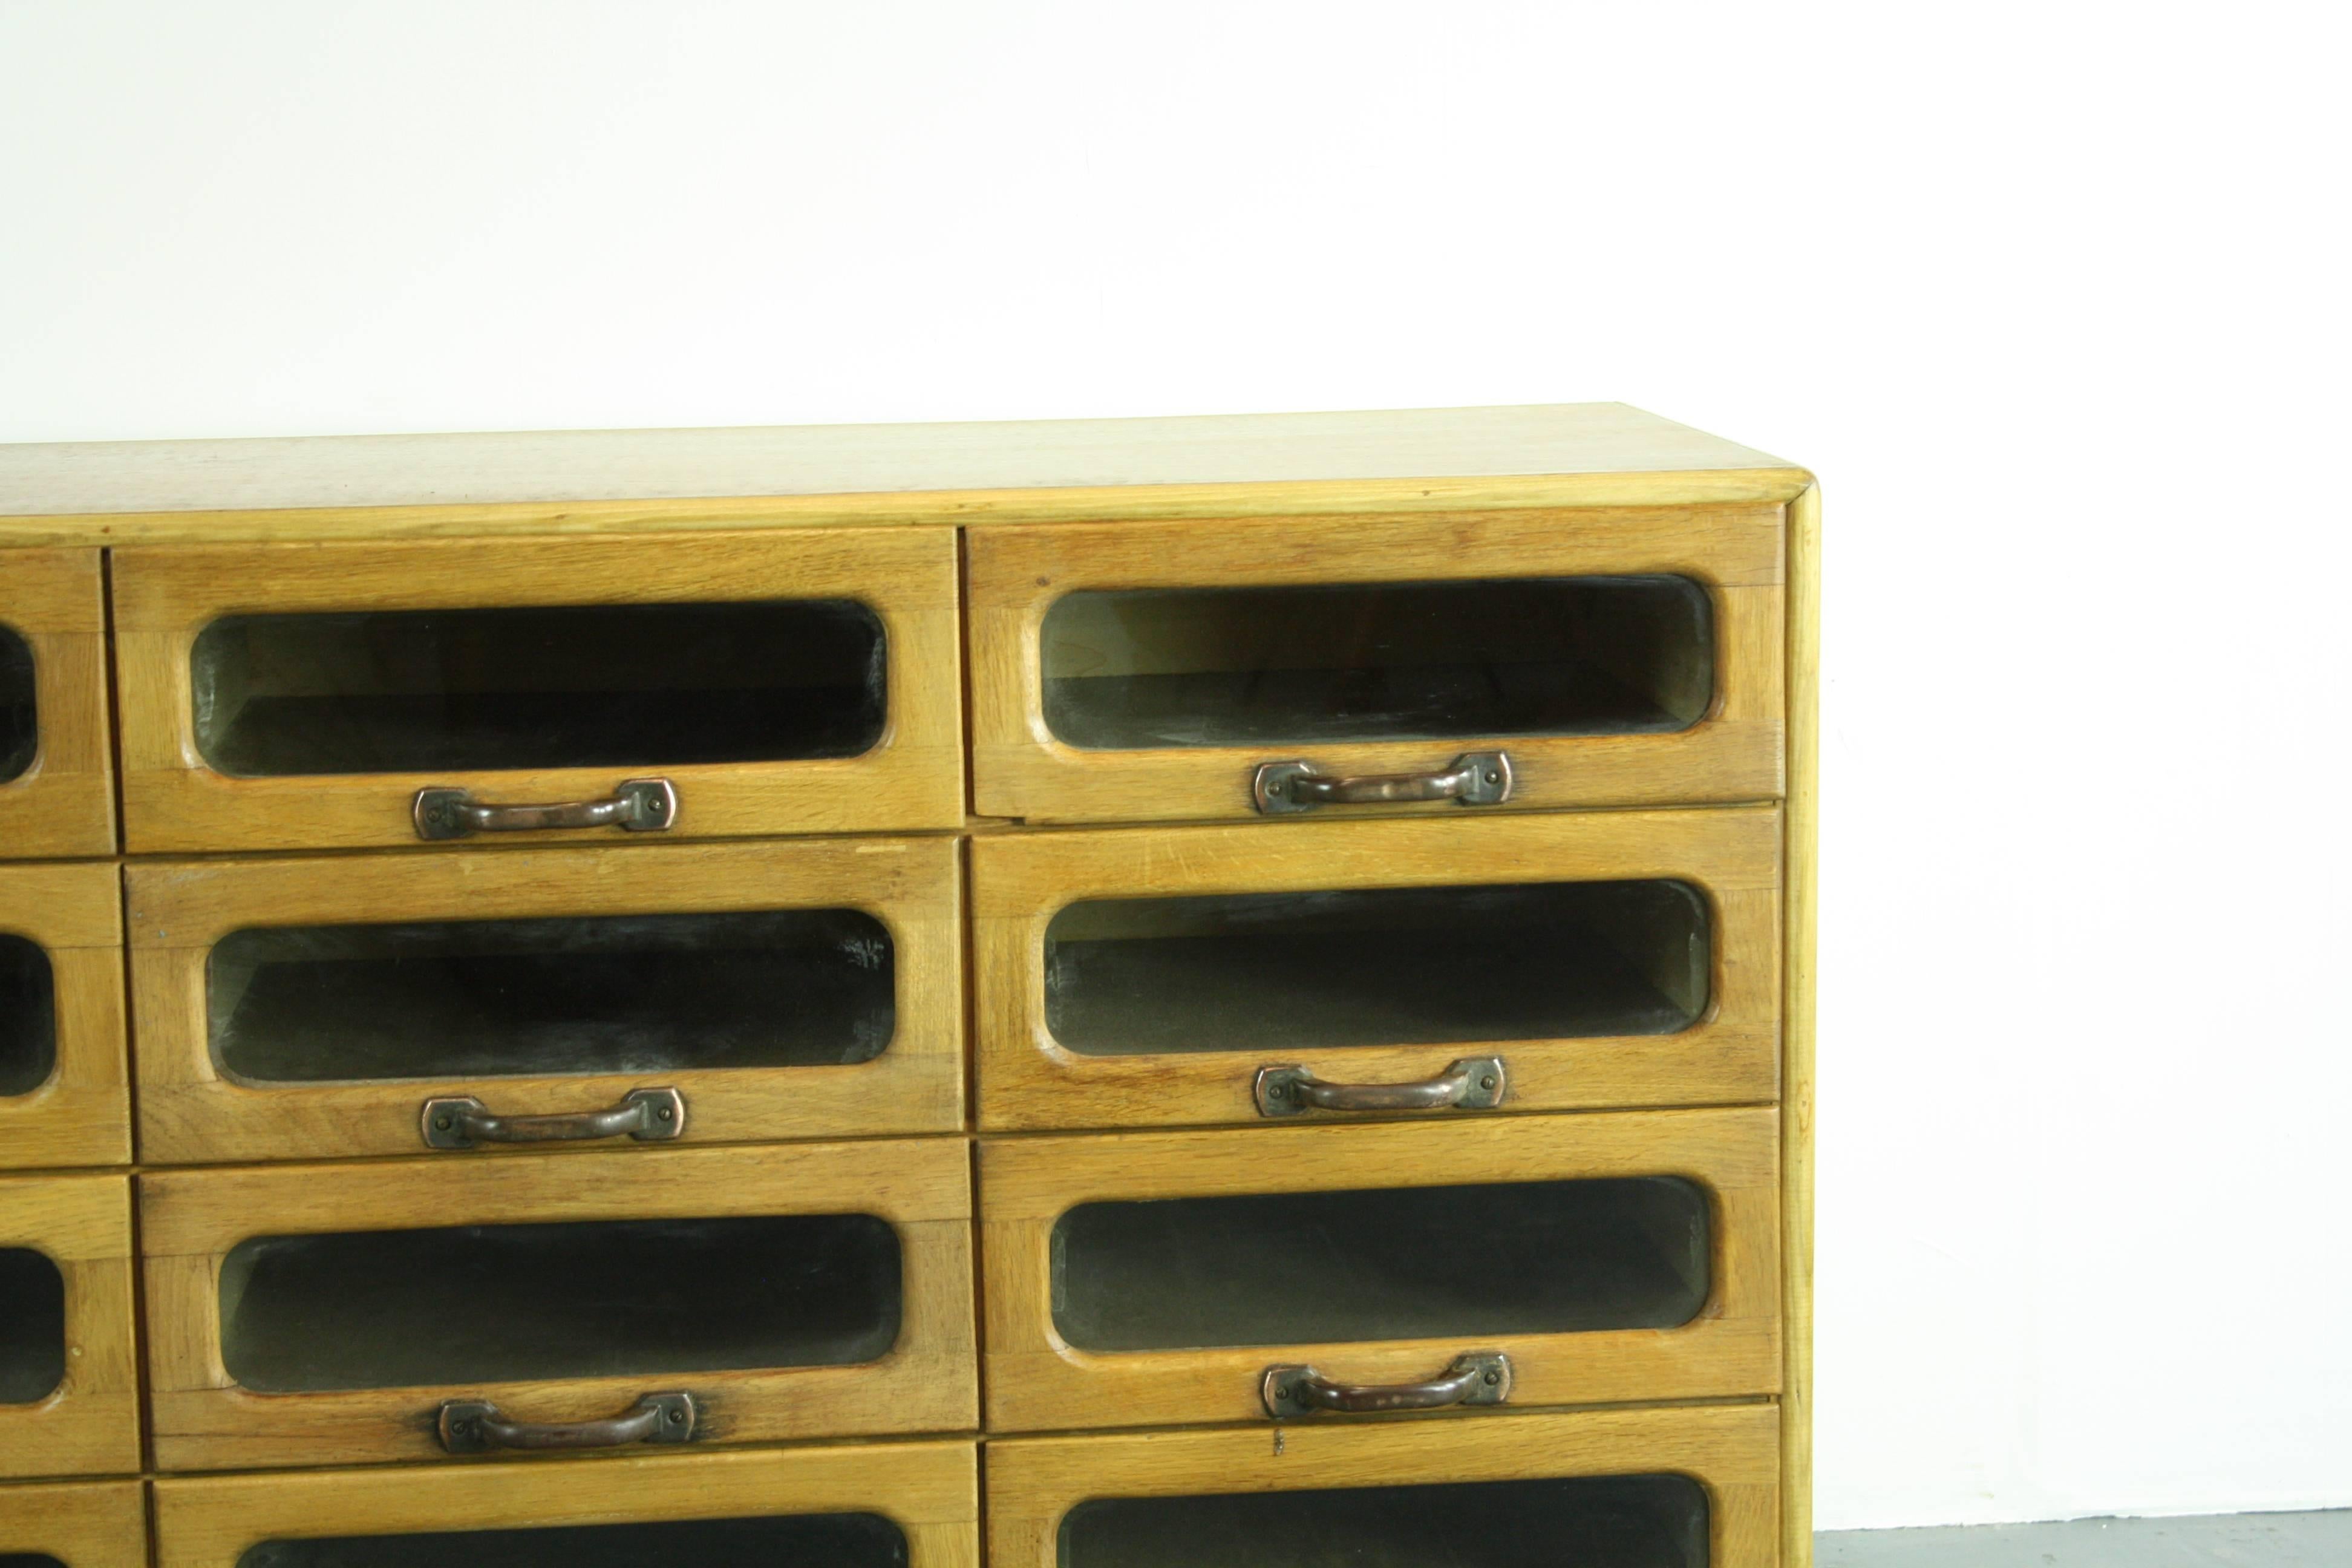 Lovely 12-drawer haberdashery shop cabinet from the first half of the last century. 

It has 12 glass fronted drawers, all with metal D handles.

Overall, in good vintage condition. 

Please bear in mind this has come from a working shop and